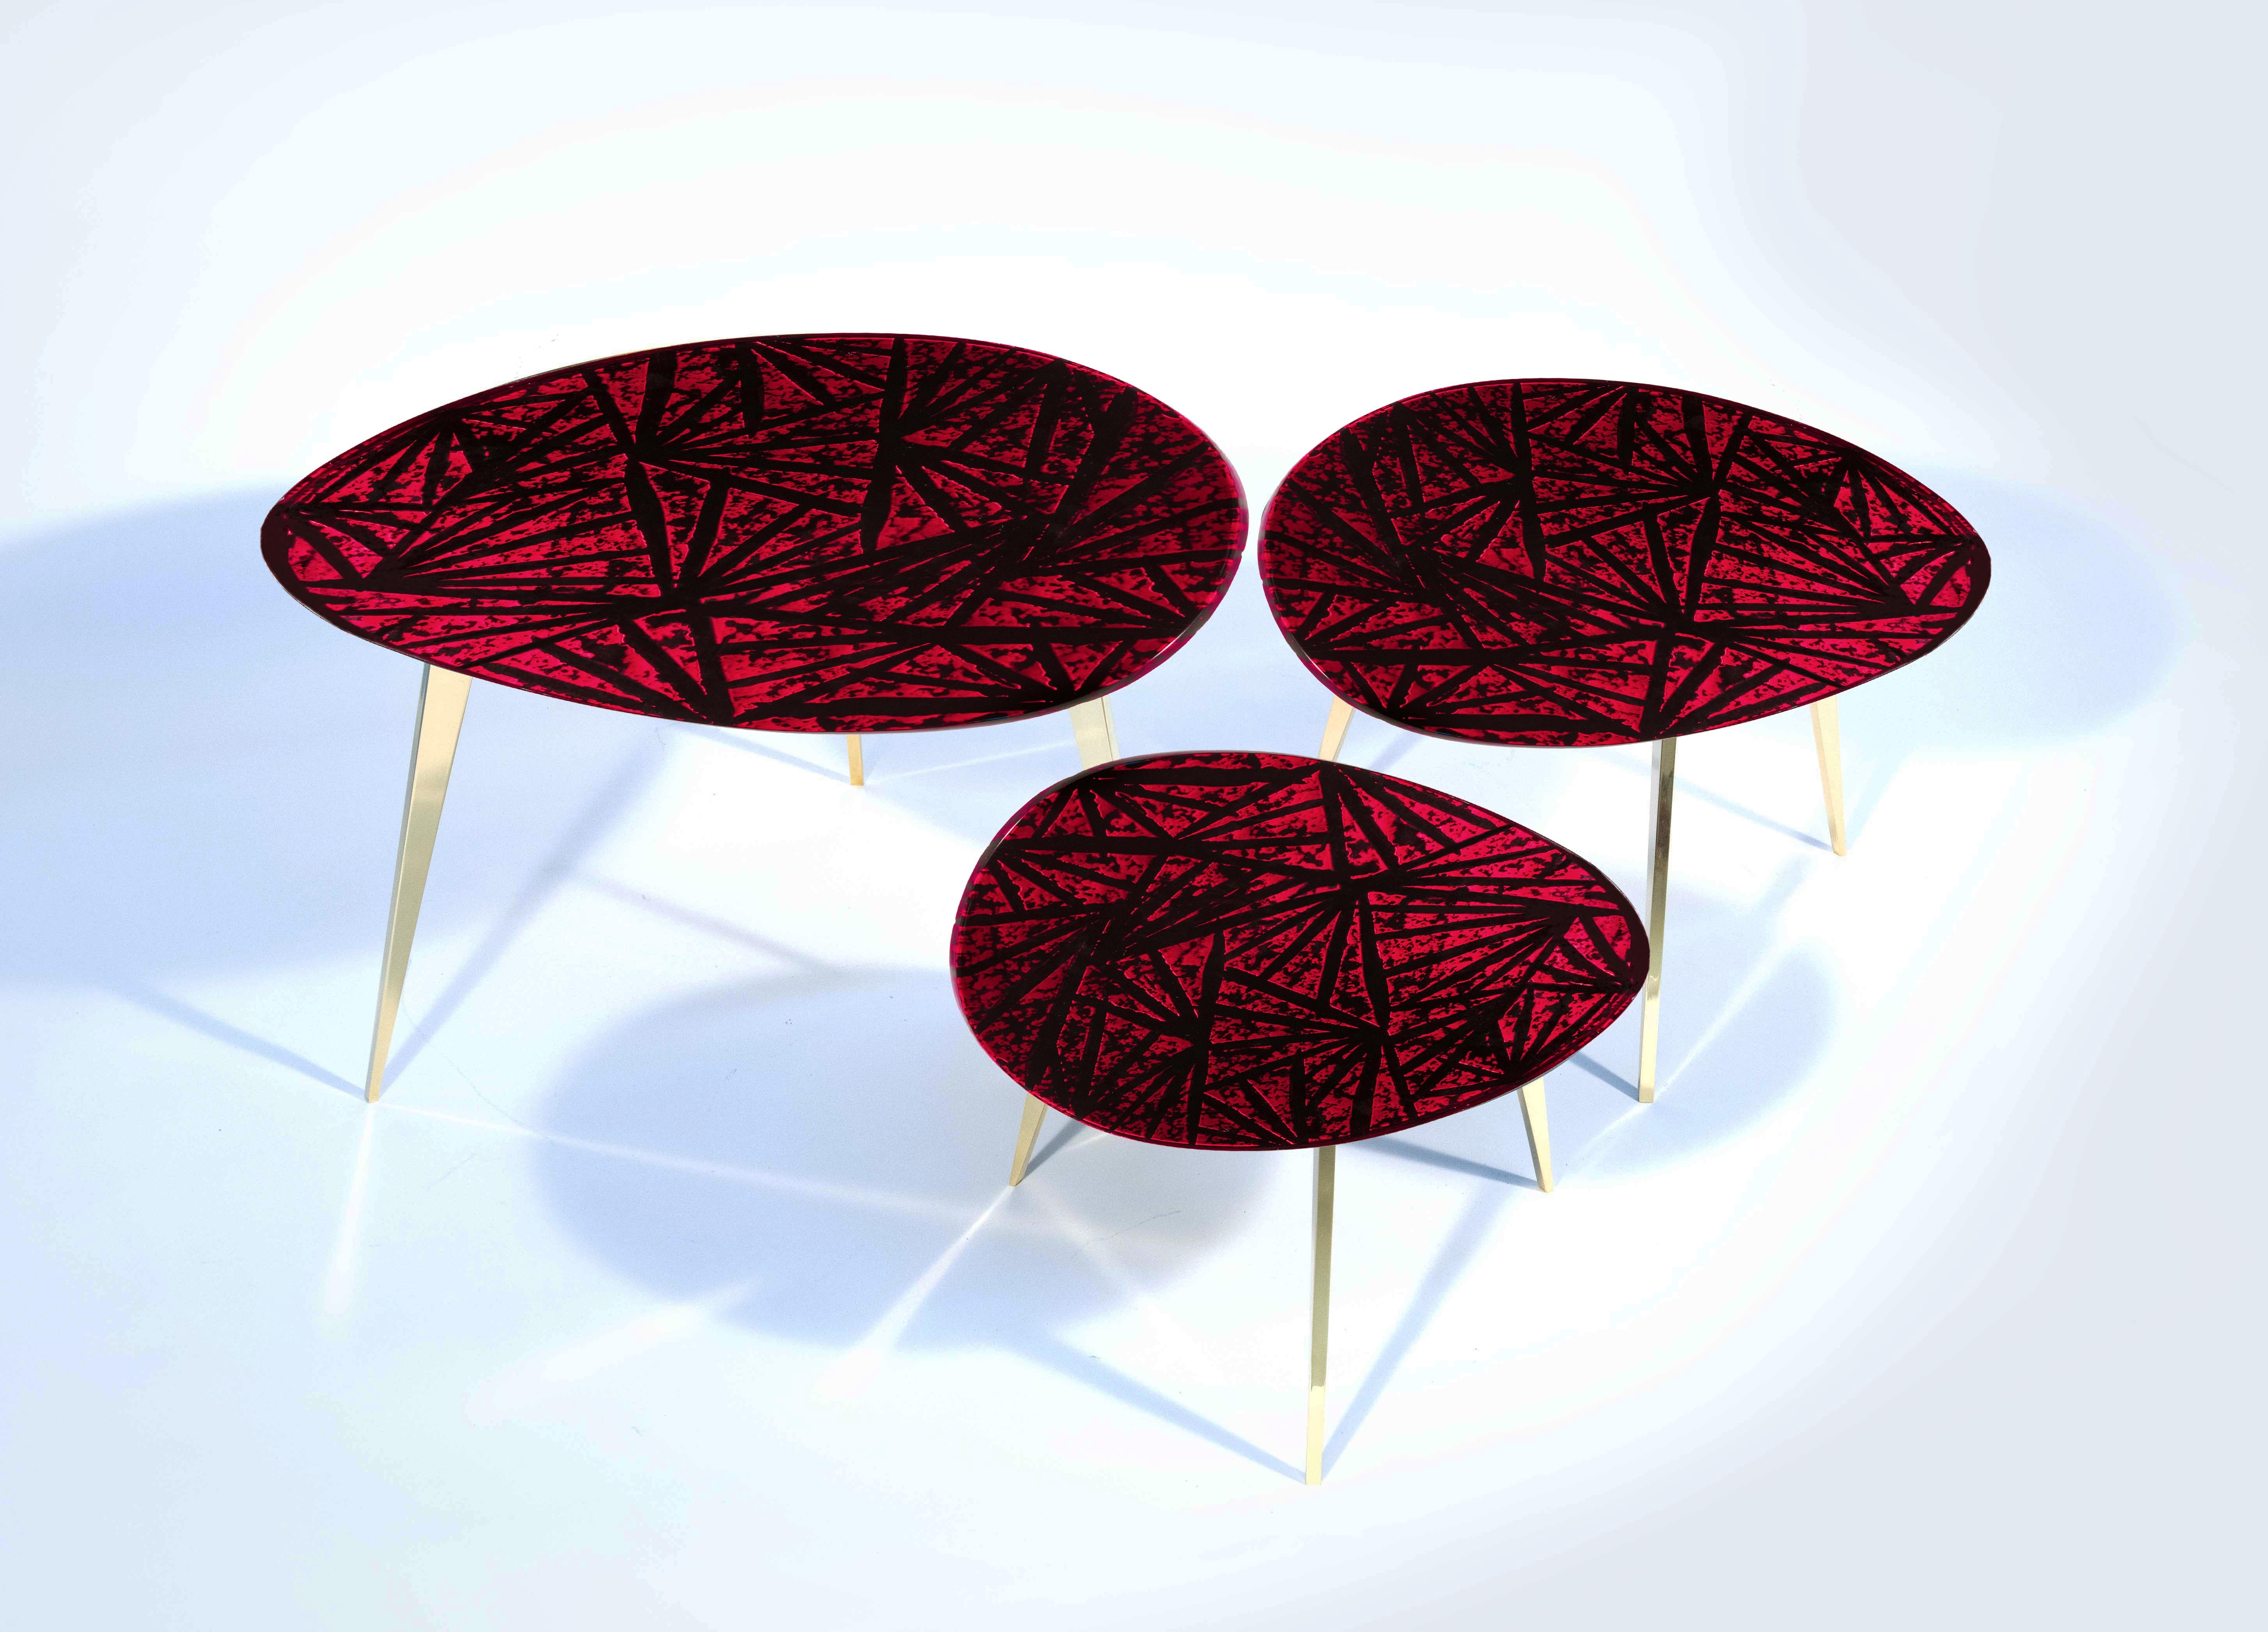 2021 Collection of coffee tables by Ghirò Studio (Milan).
This set of three tables is the solution for elegant and refined furnishings.
Each coffee table is a unique piece. It is hand made to order with the utmost care and attention to